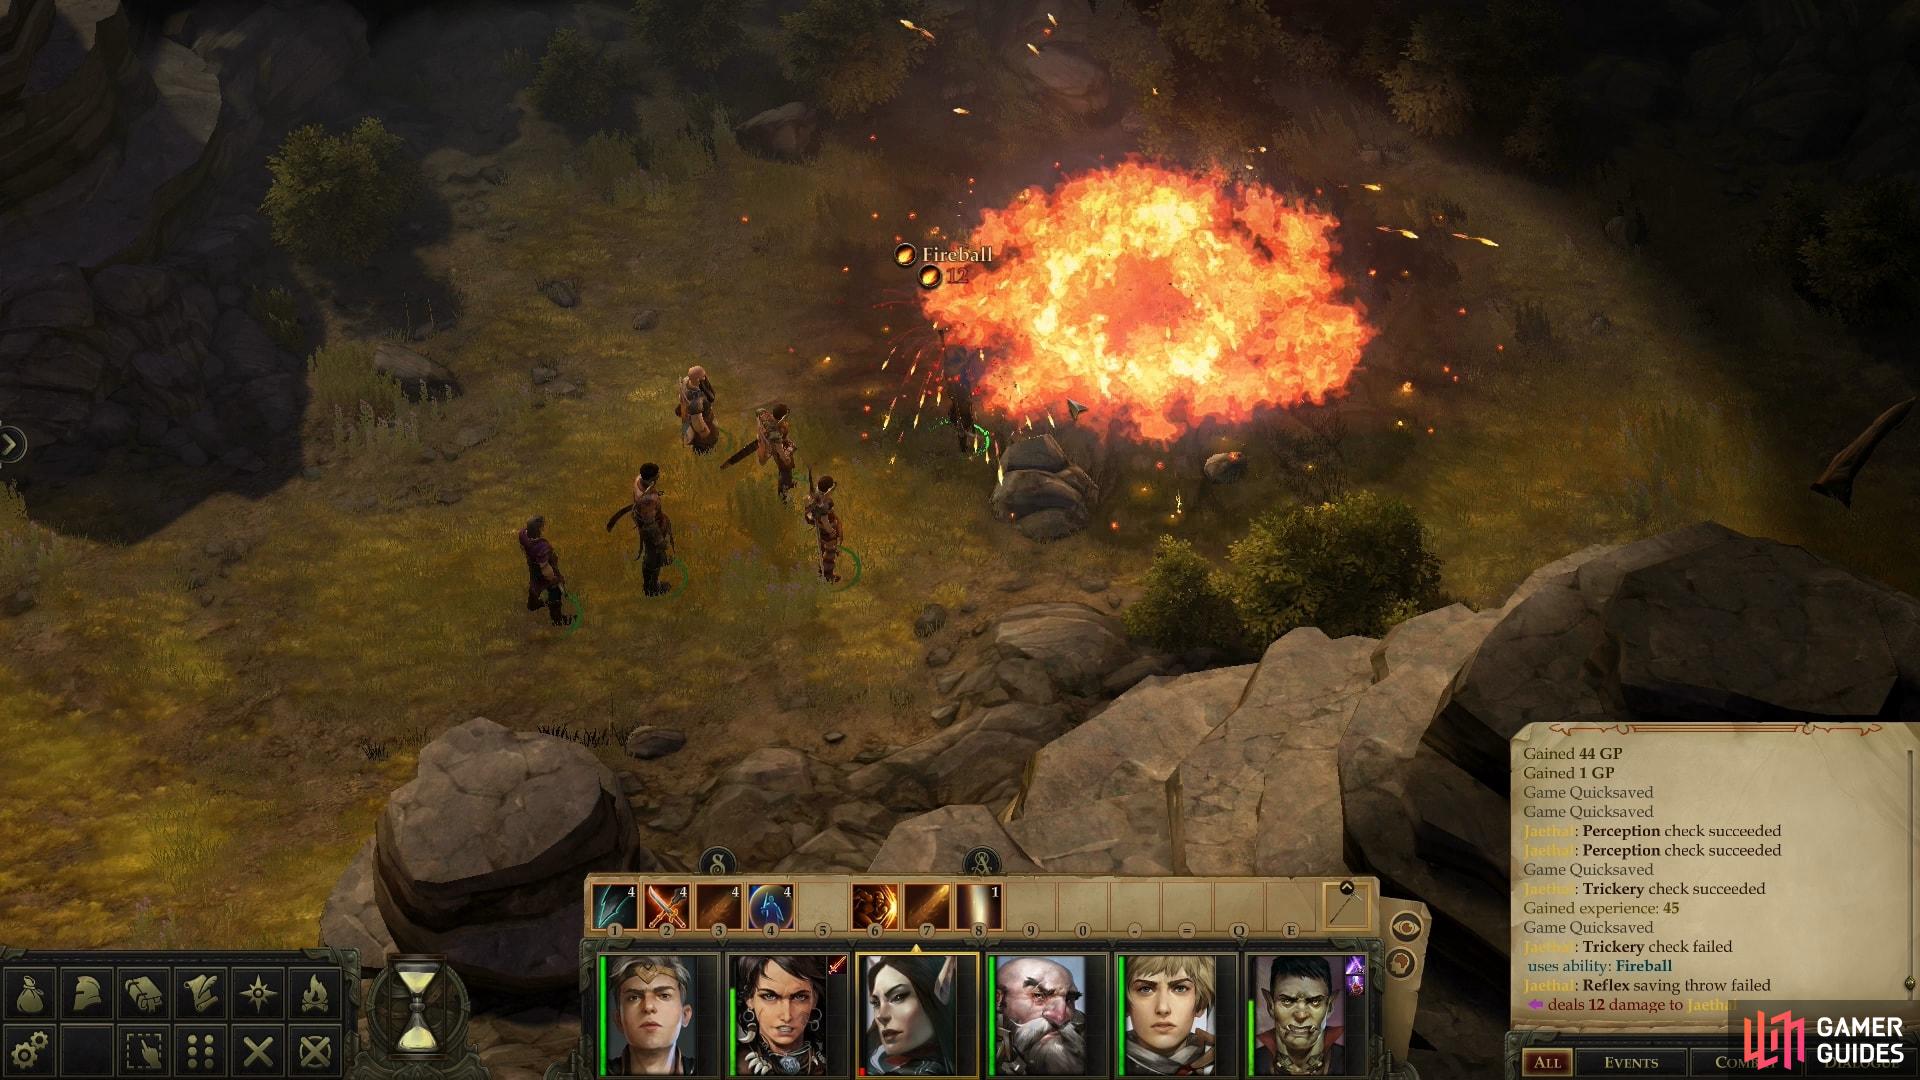 Fail to disarm the traps around the bandit camp, and you're in for a fiery reprimand.